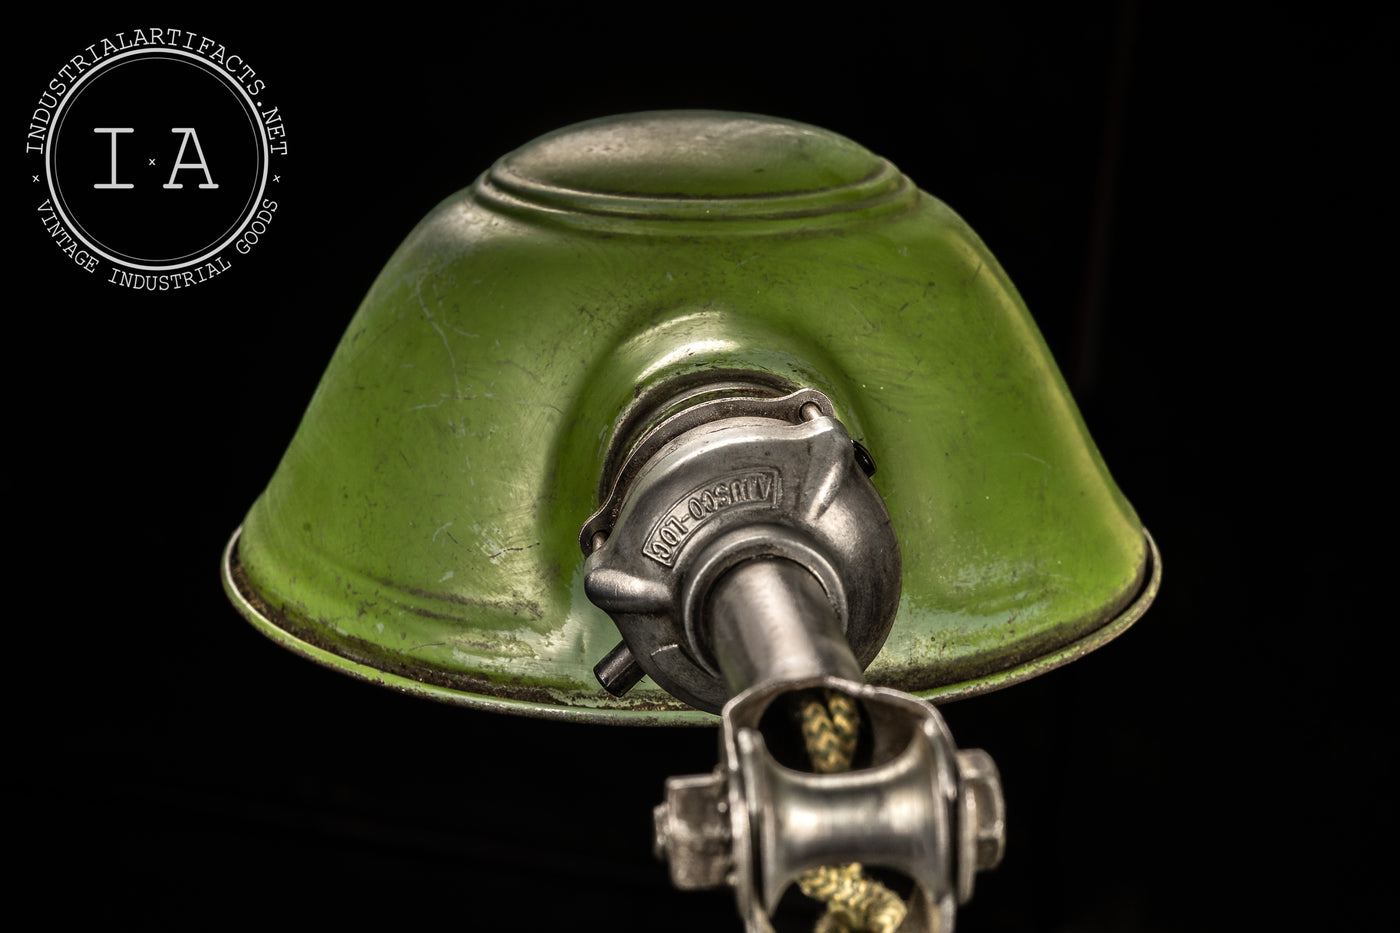 Antique Ajusco Task Lamp with Green Shade